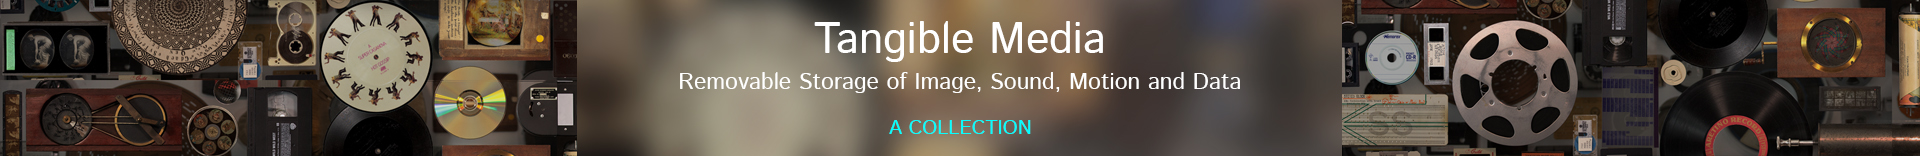 Tangible Media: Removable Storage of Image, Sound, Motion and Data. A Collection.